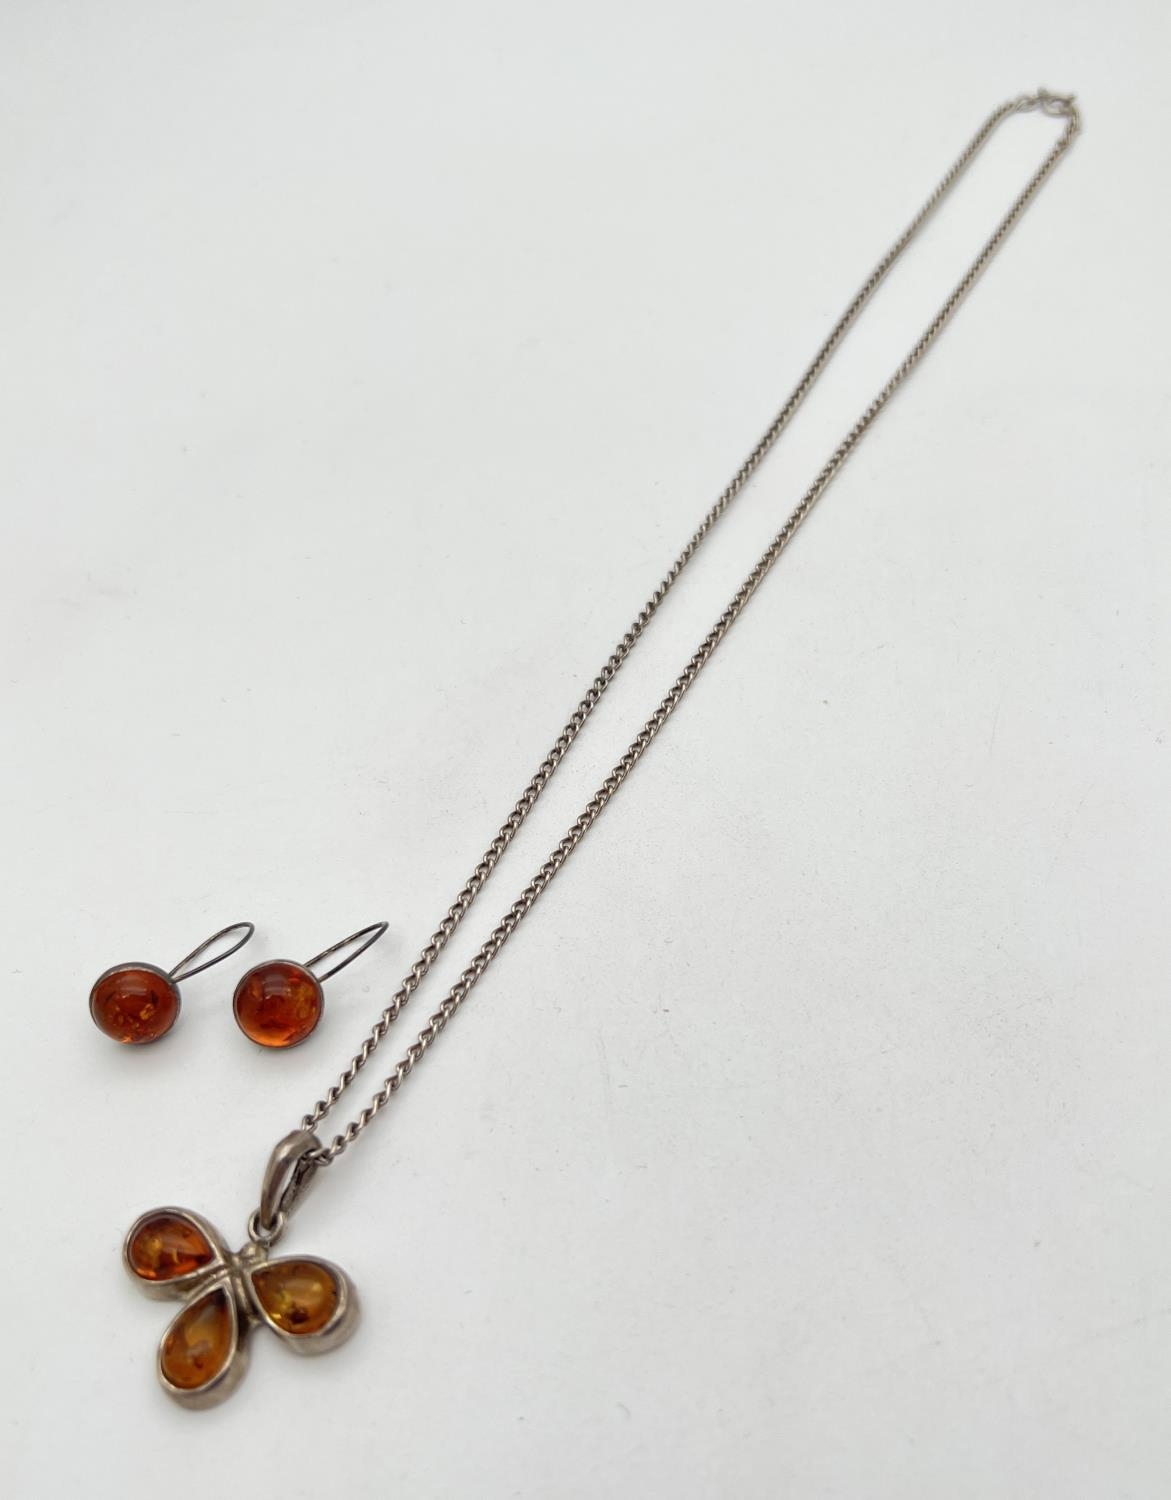 A flower design silver and amber pendant on a 20 inch curb chain with spring ring clasp. Together - Image 2 of 2